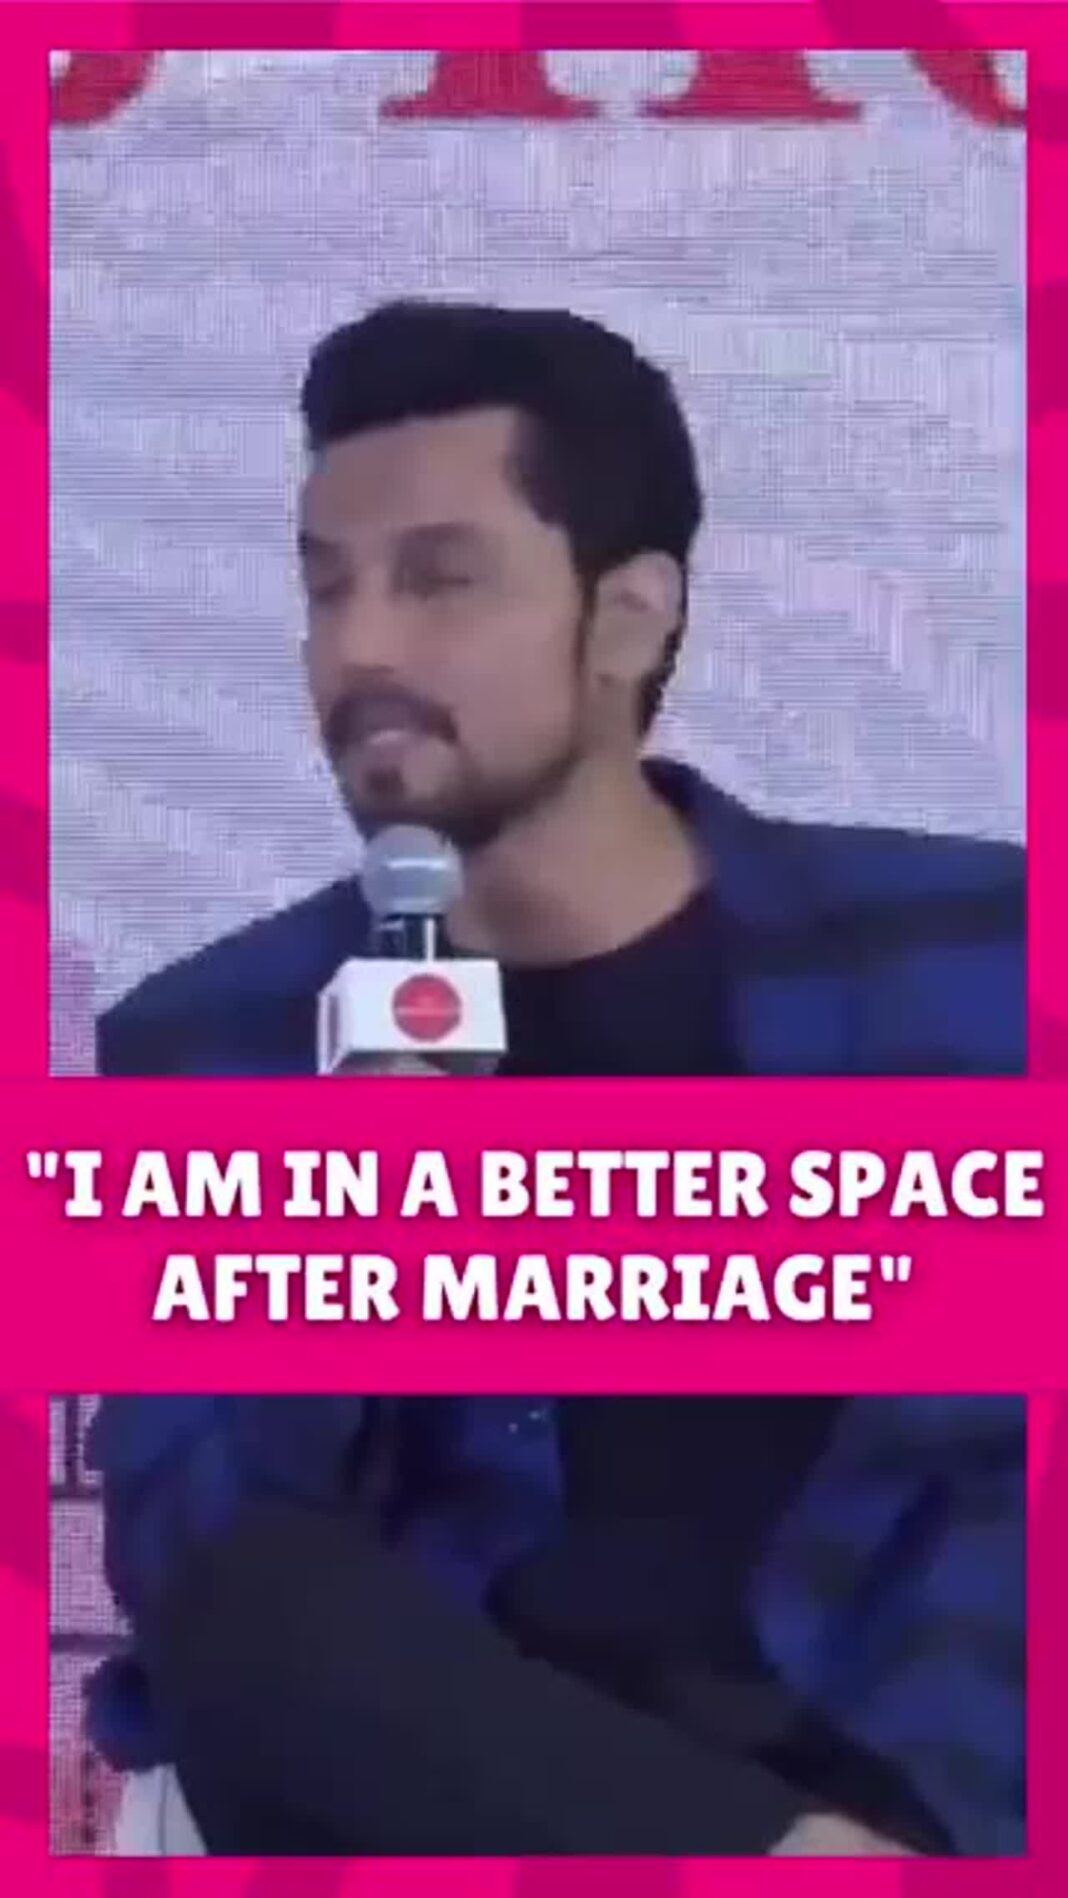 actor-randeep-hooda-reflects-on-how-marriage-changed-him-for-the-better